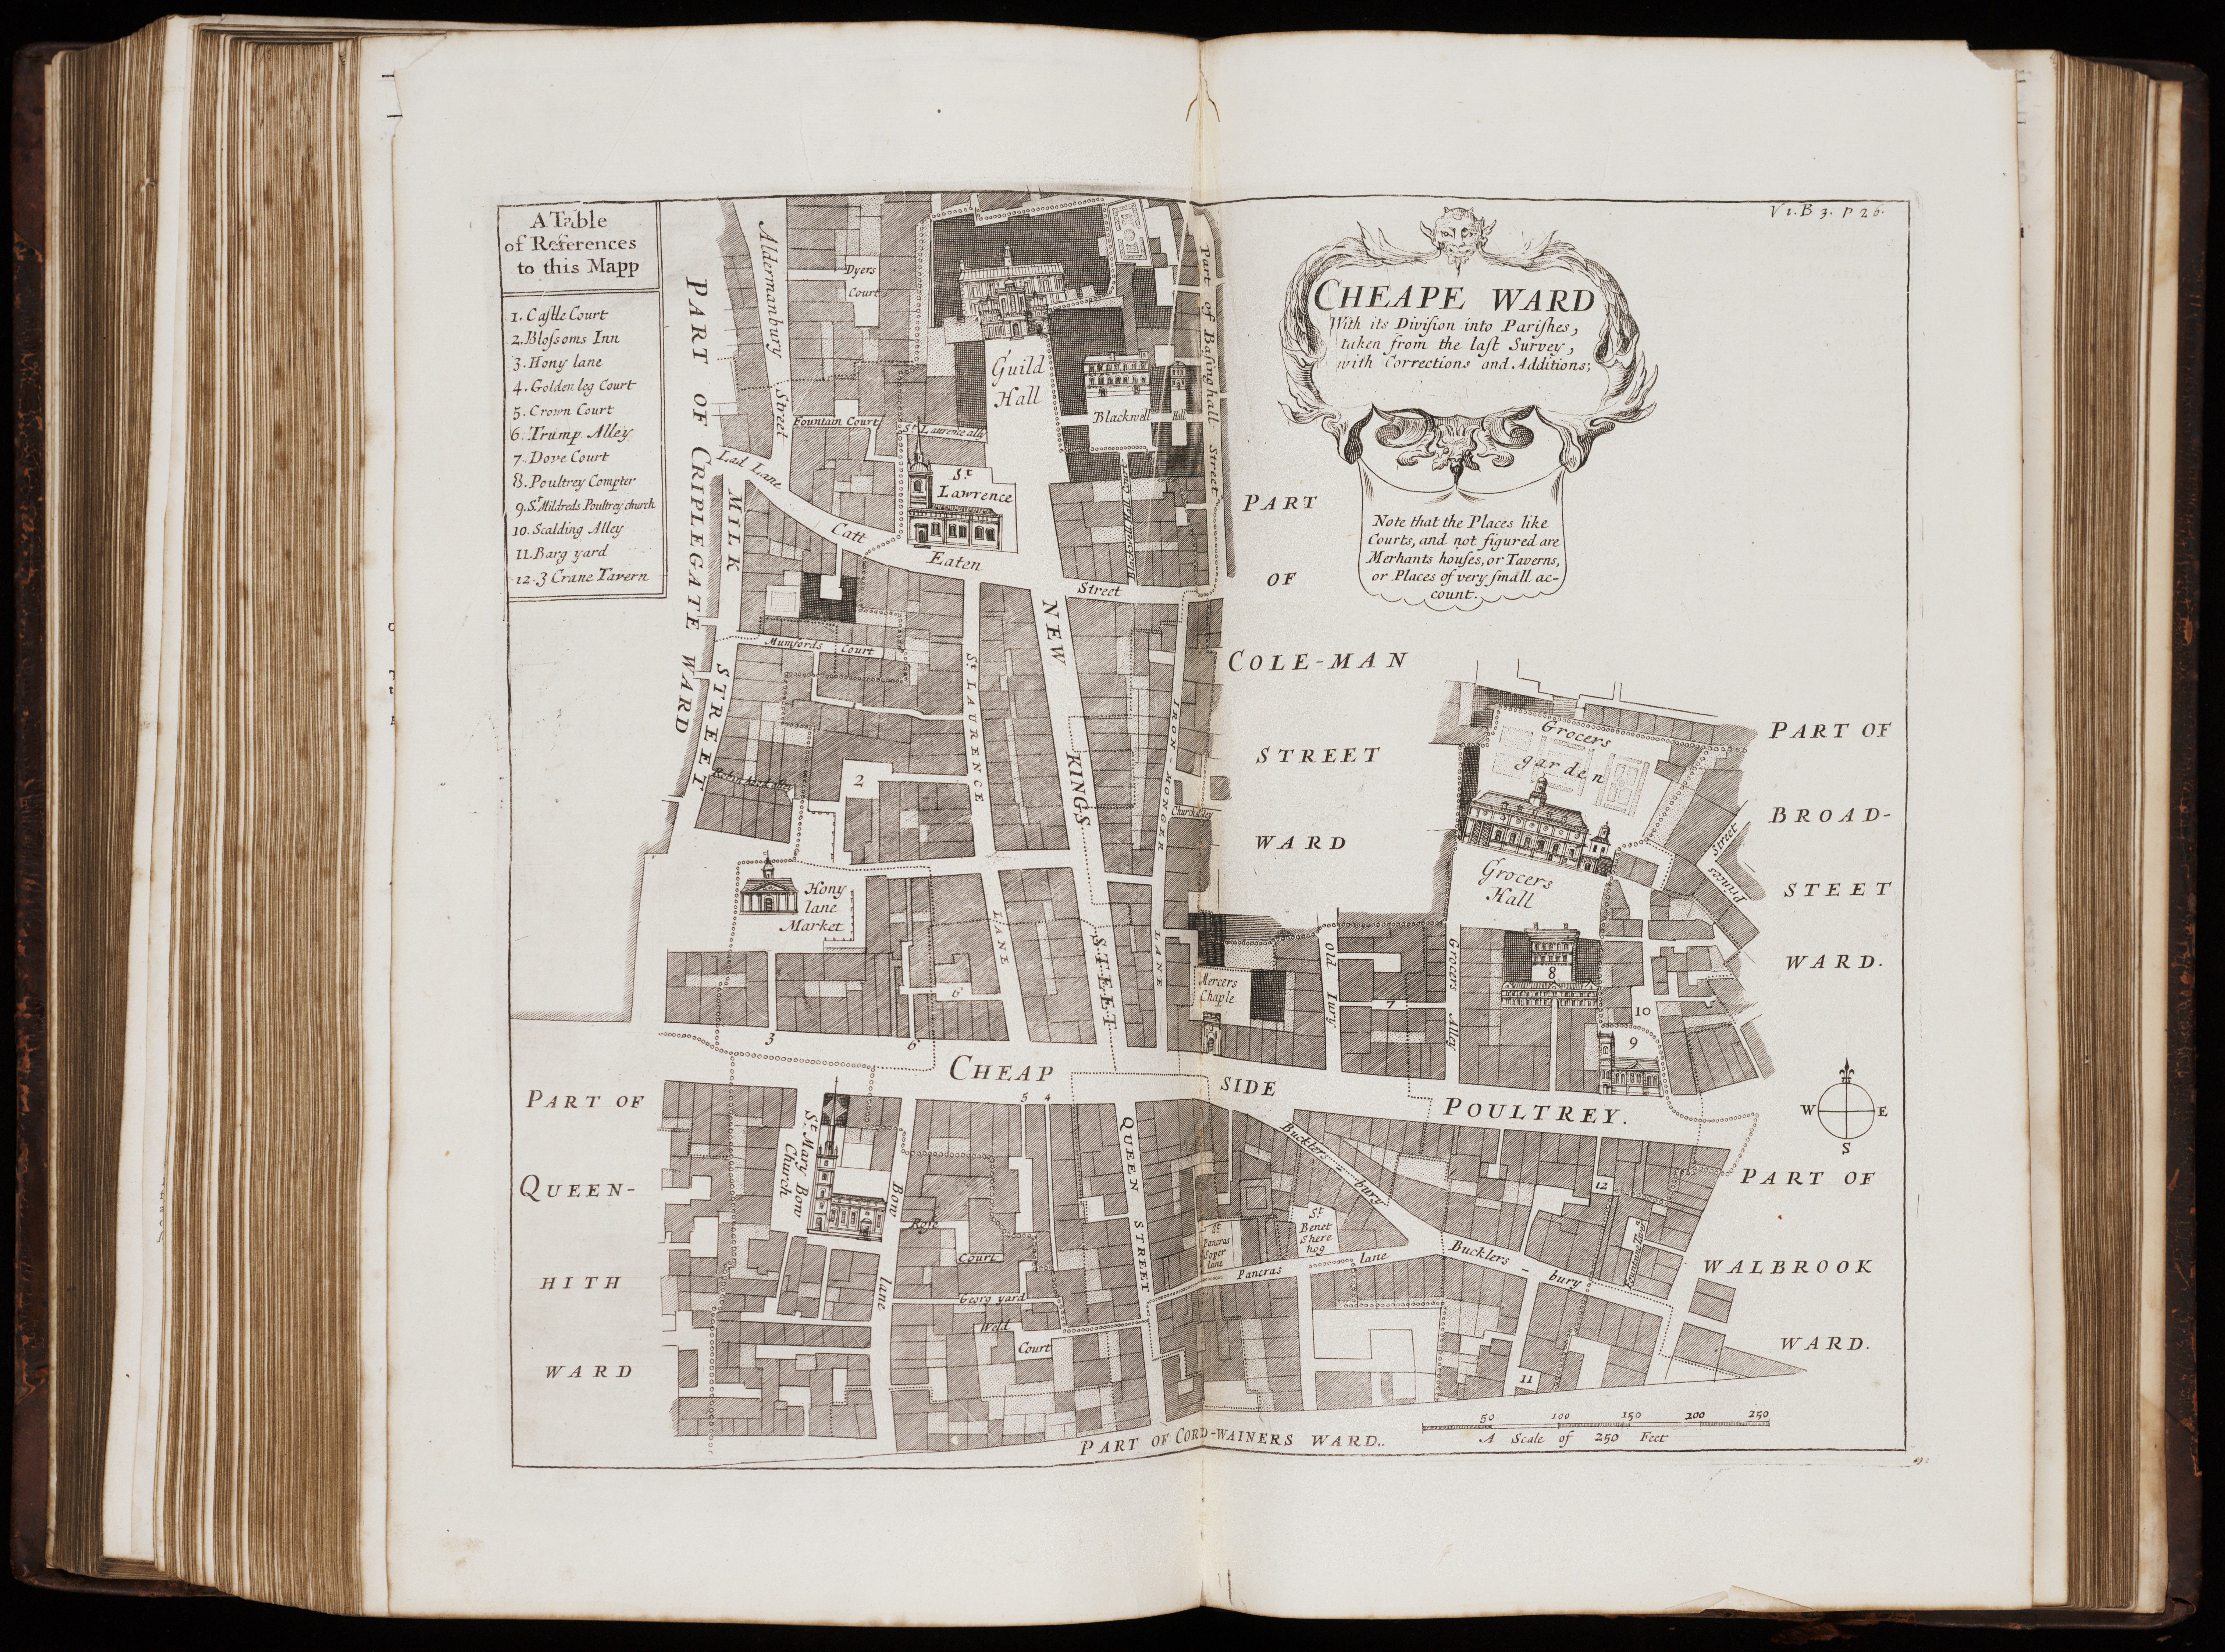 1720: Blome’s Map of Cheap Ward. Image courtesy of Yale University Library. 
                        Call No. 1977 +392